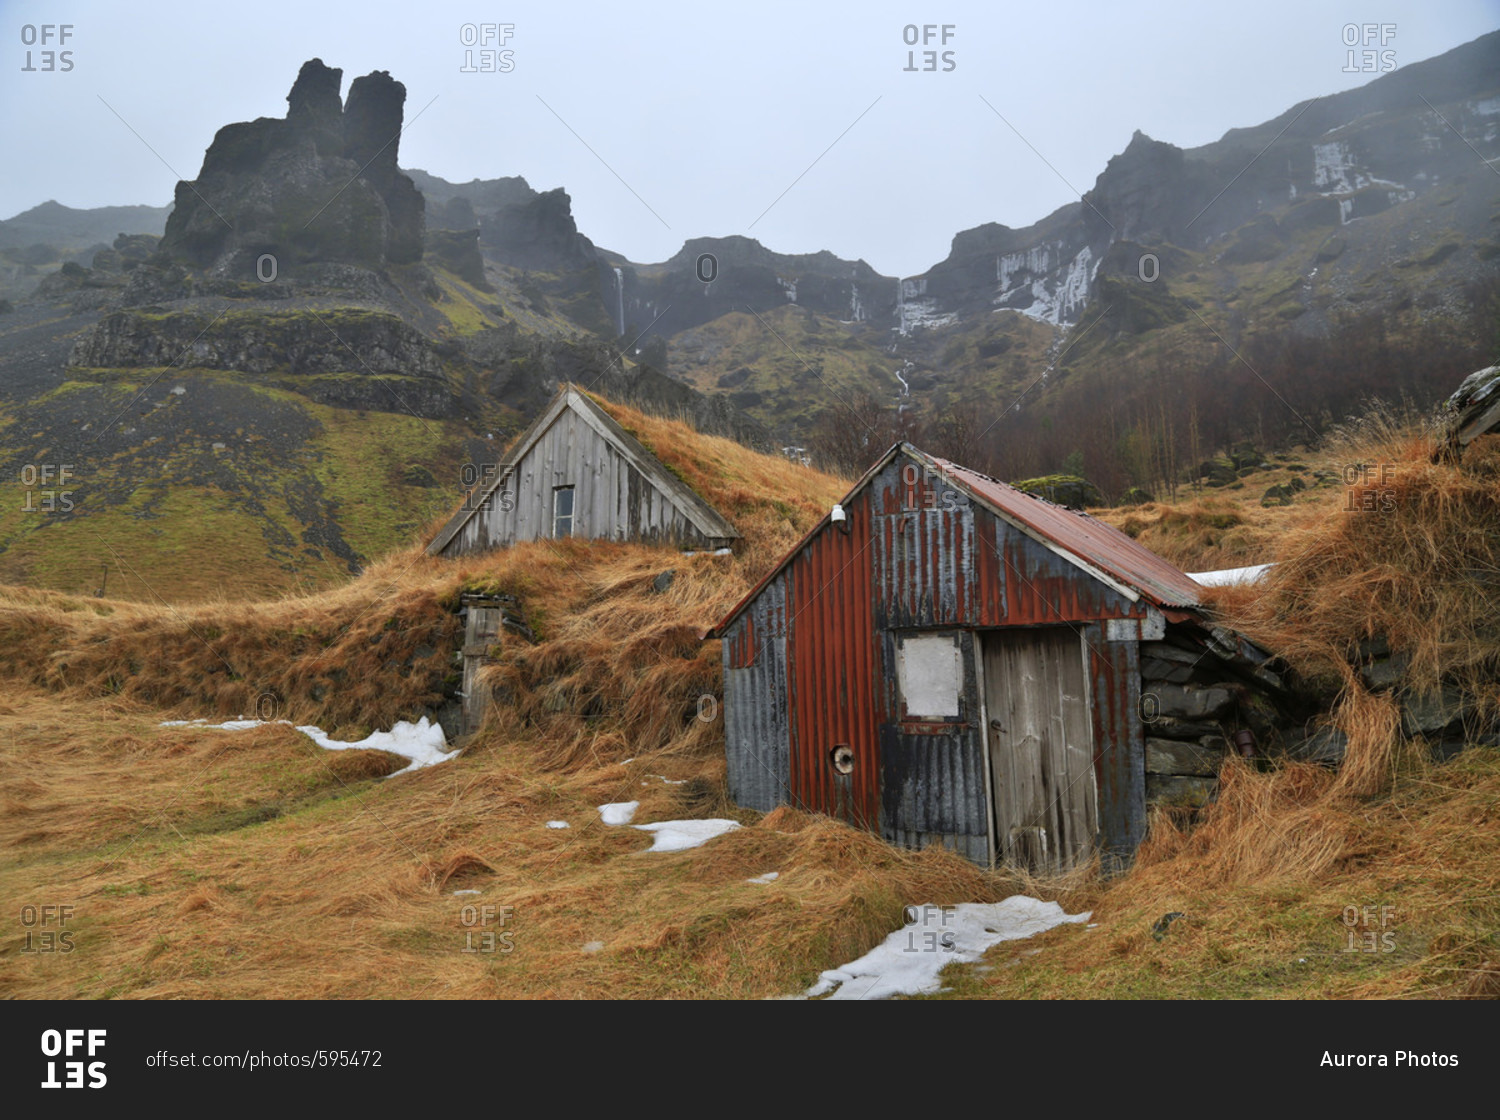 Nupsstaour abandoned farm turf-roofed sheds, Iceland